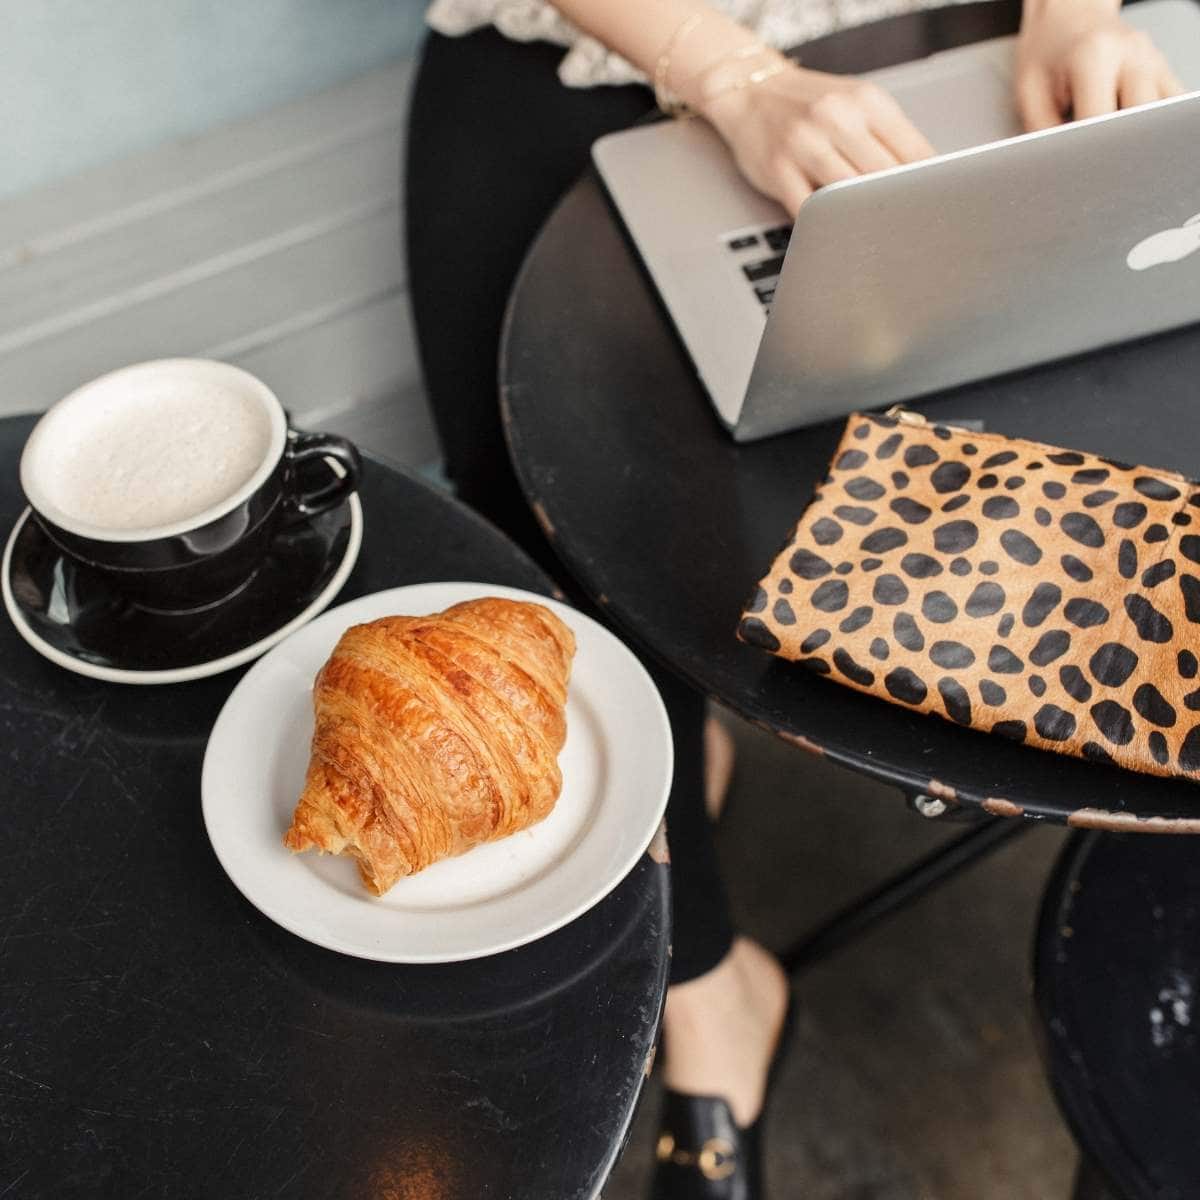 Kat typing on MacBook Pro at San Francisco cafe with croissant, latte, lace top, black jeans, and Gucci loafers.